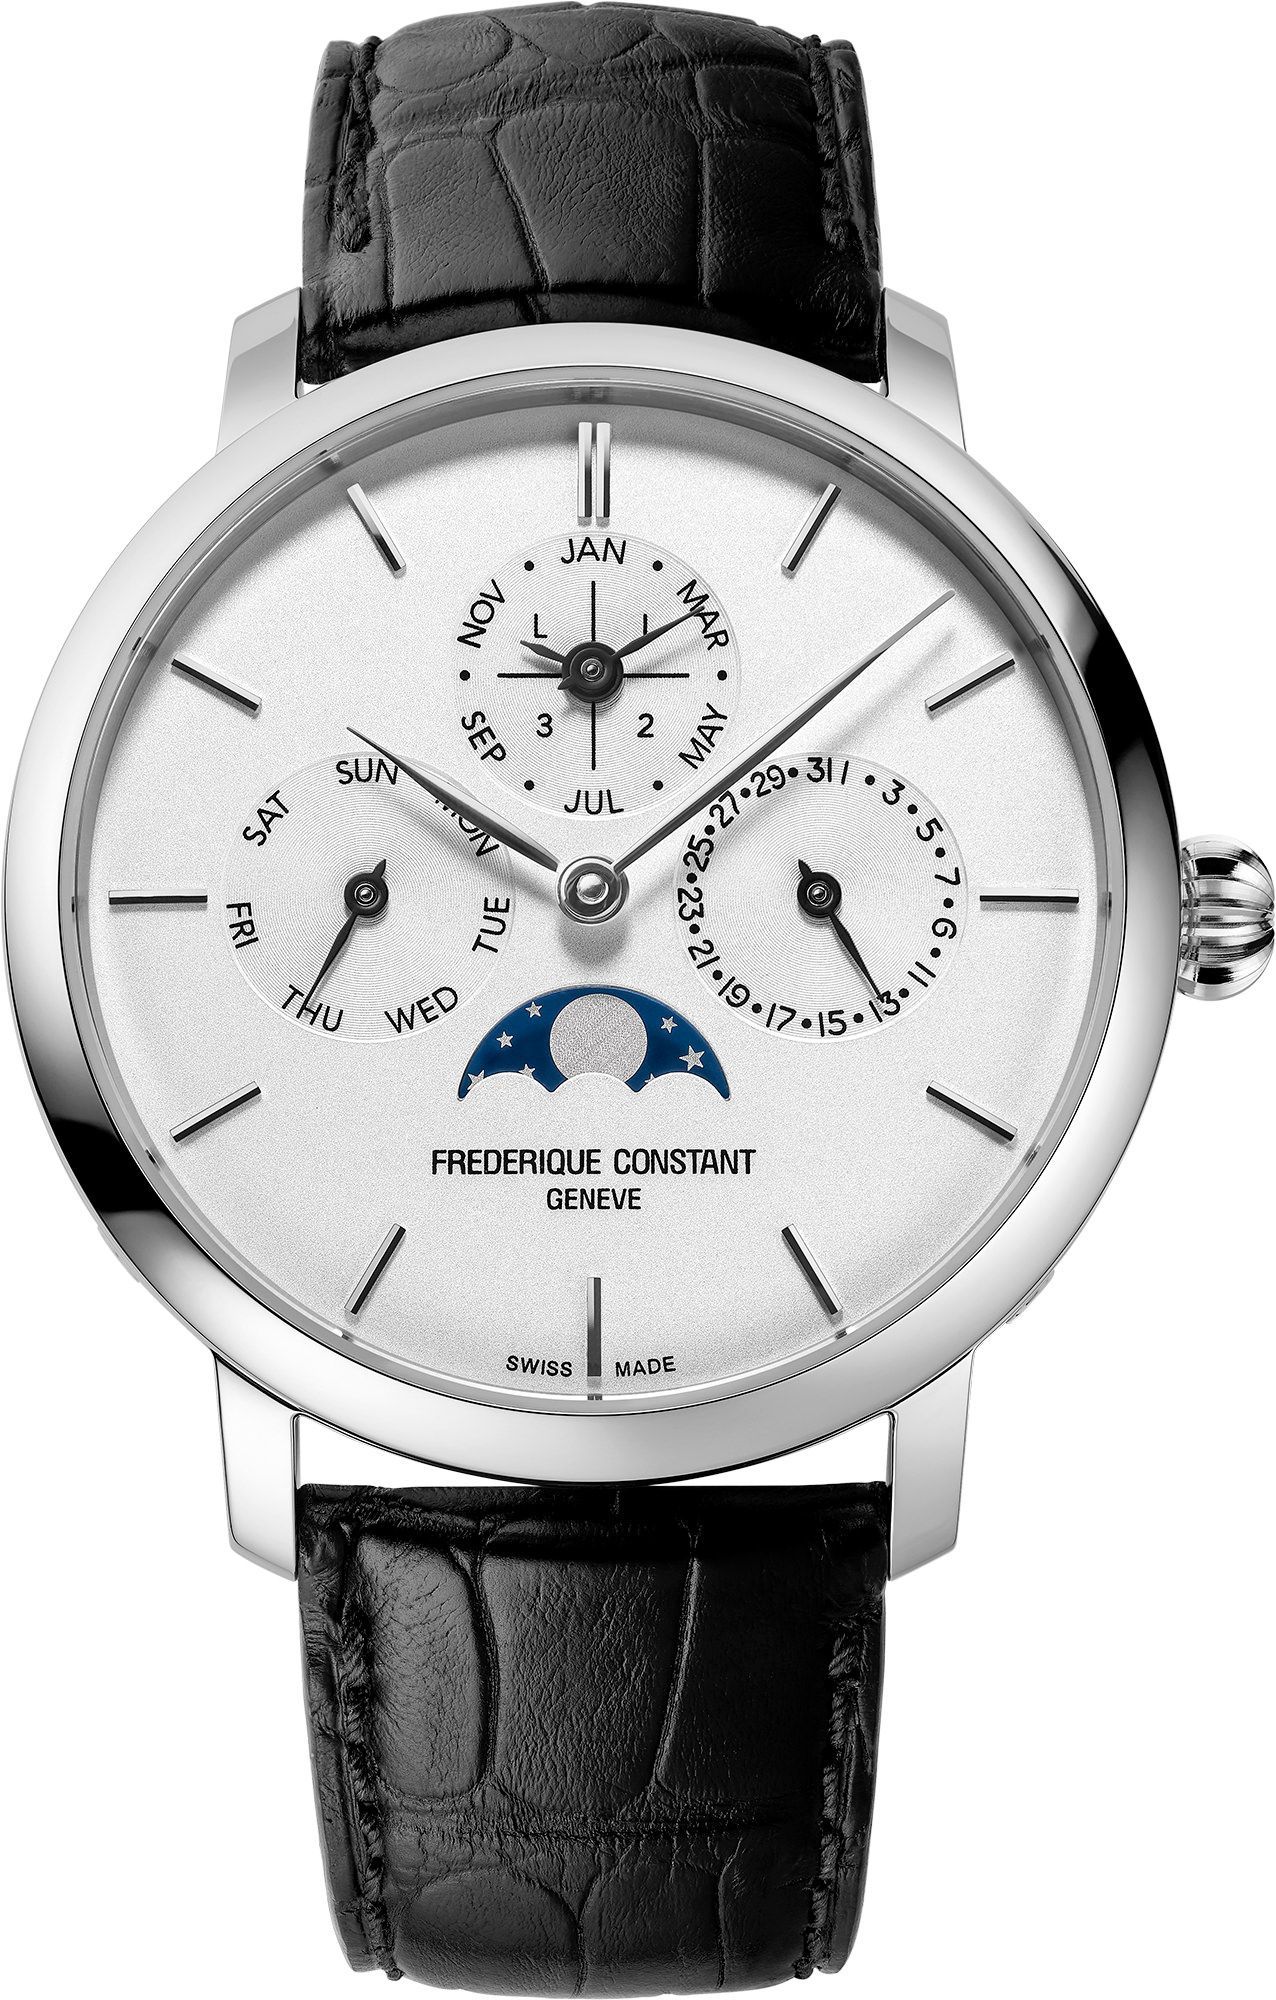 Frederique Constant Manufacture Slimline Perpetual Calendar 42 mm Watch in Silver Dial For Men - 1